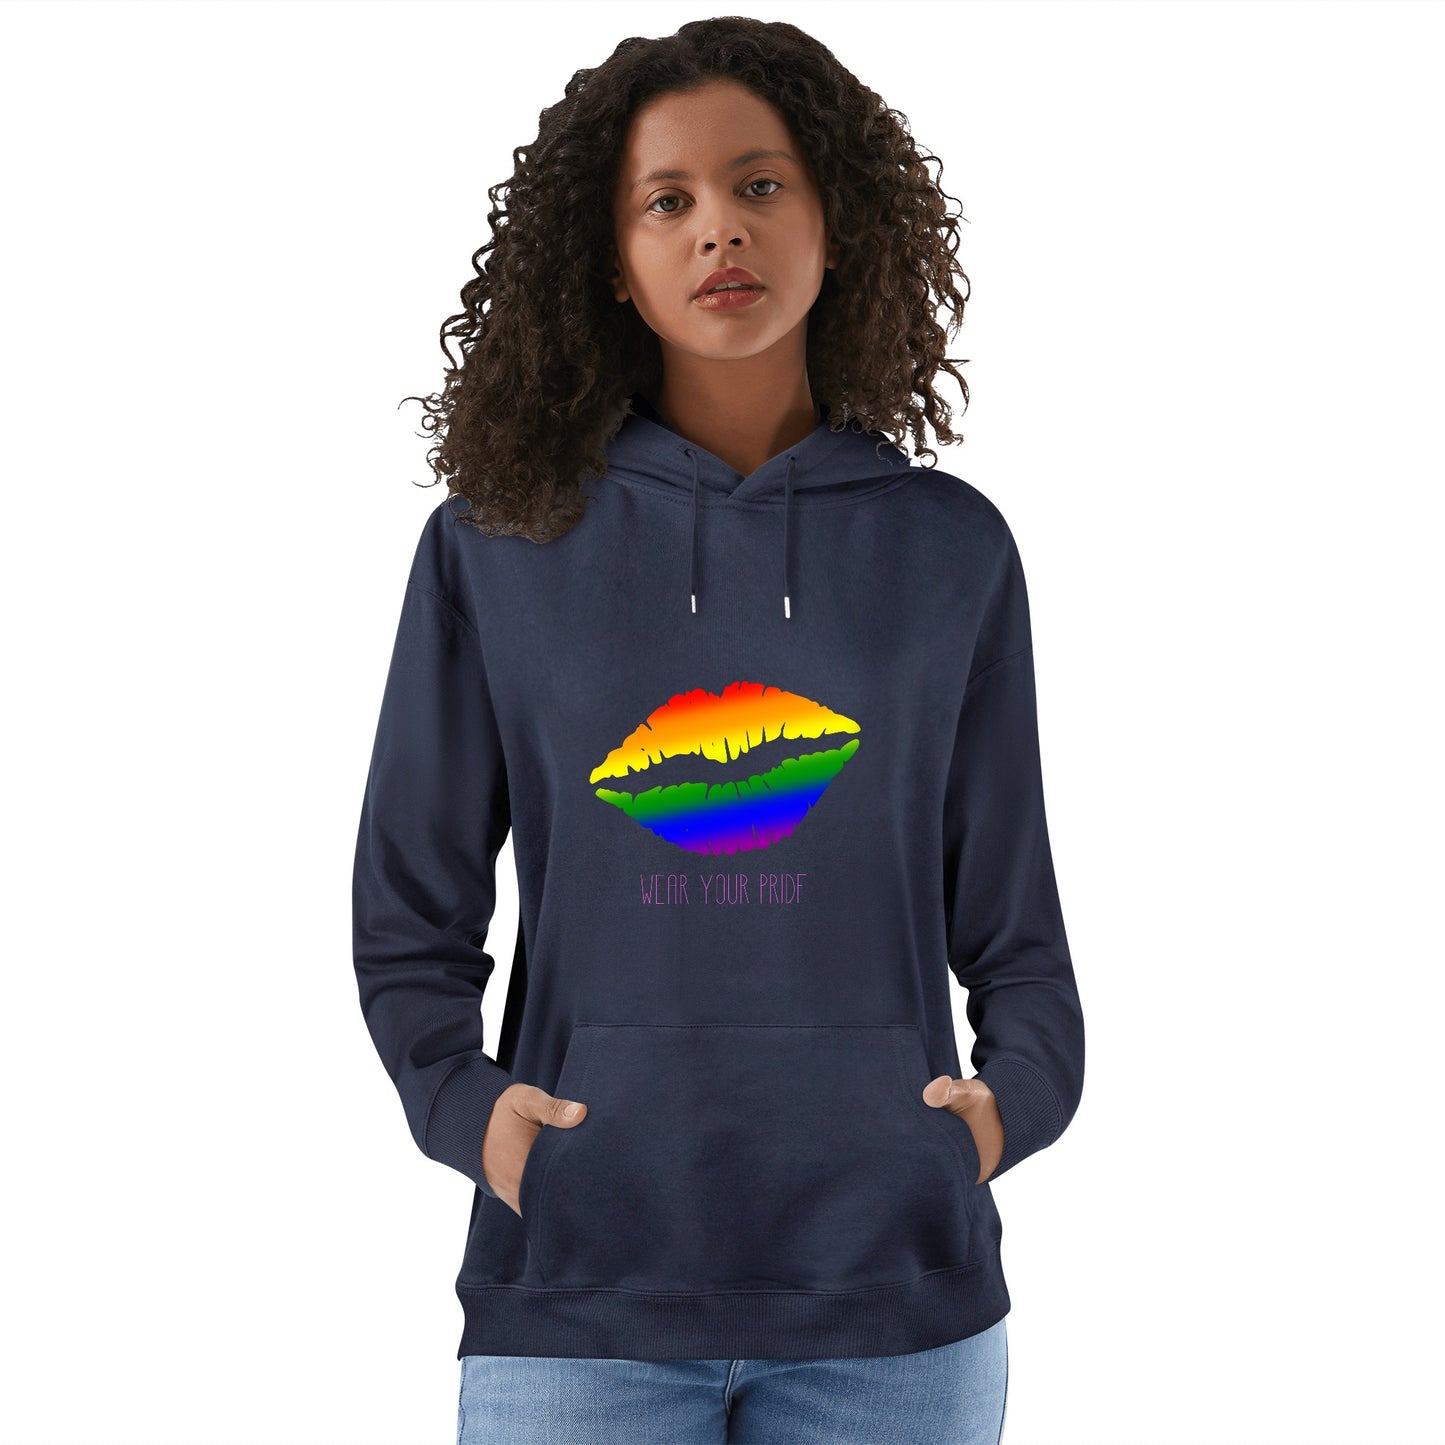 LGBTQ+ Wear Your Pride  Adult Cotton Hoodie. with logo